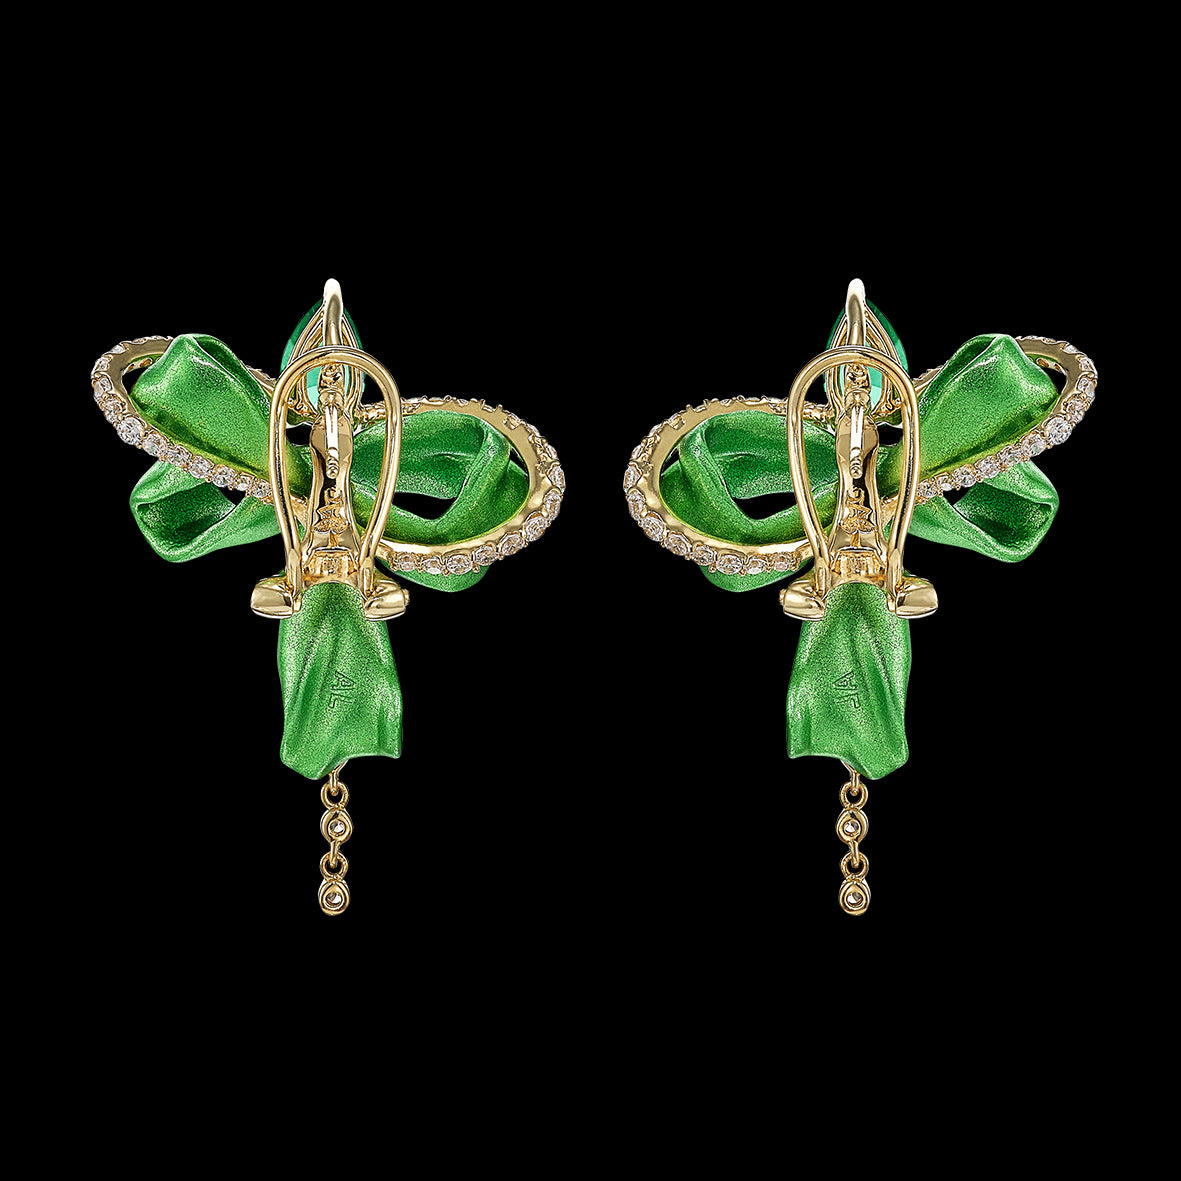 Emerald Cupid's Bow Earrings, Earring, Anabela Chan Joaillerie - Fine jewelry with laboratory grown and created gemstones hand-crafted in the United Kingdom. Anabela Chan Joaillerie is the first fine jewellery brand in the world to champion laboratory-grown and created gemstones with high jewellery design, artisanal craftsmanship and a focus on ethical and sustainable innovations.